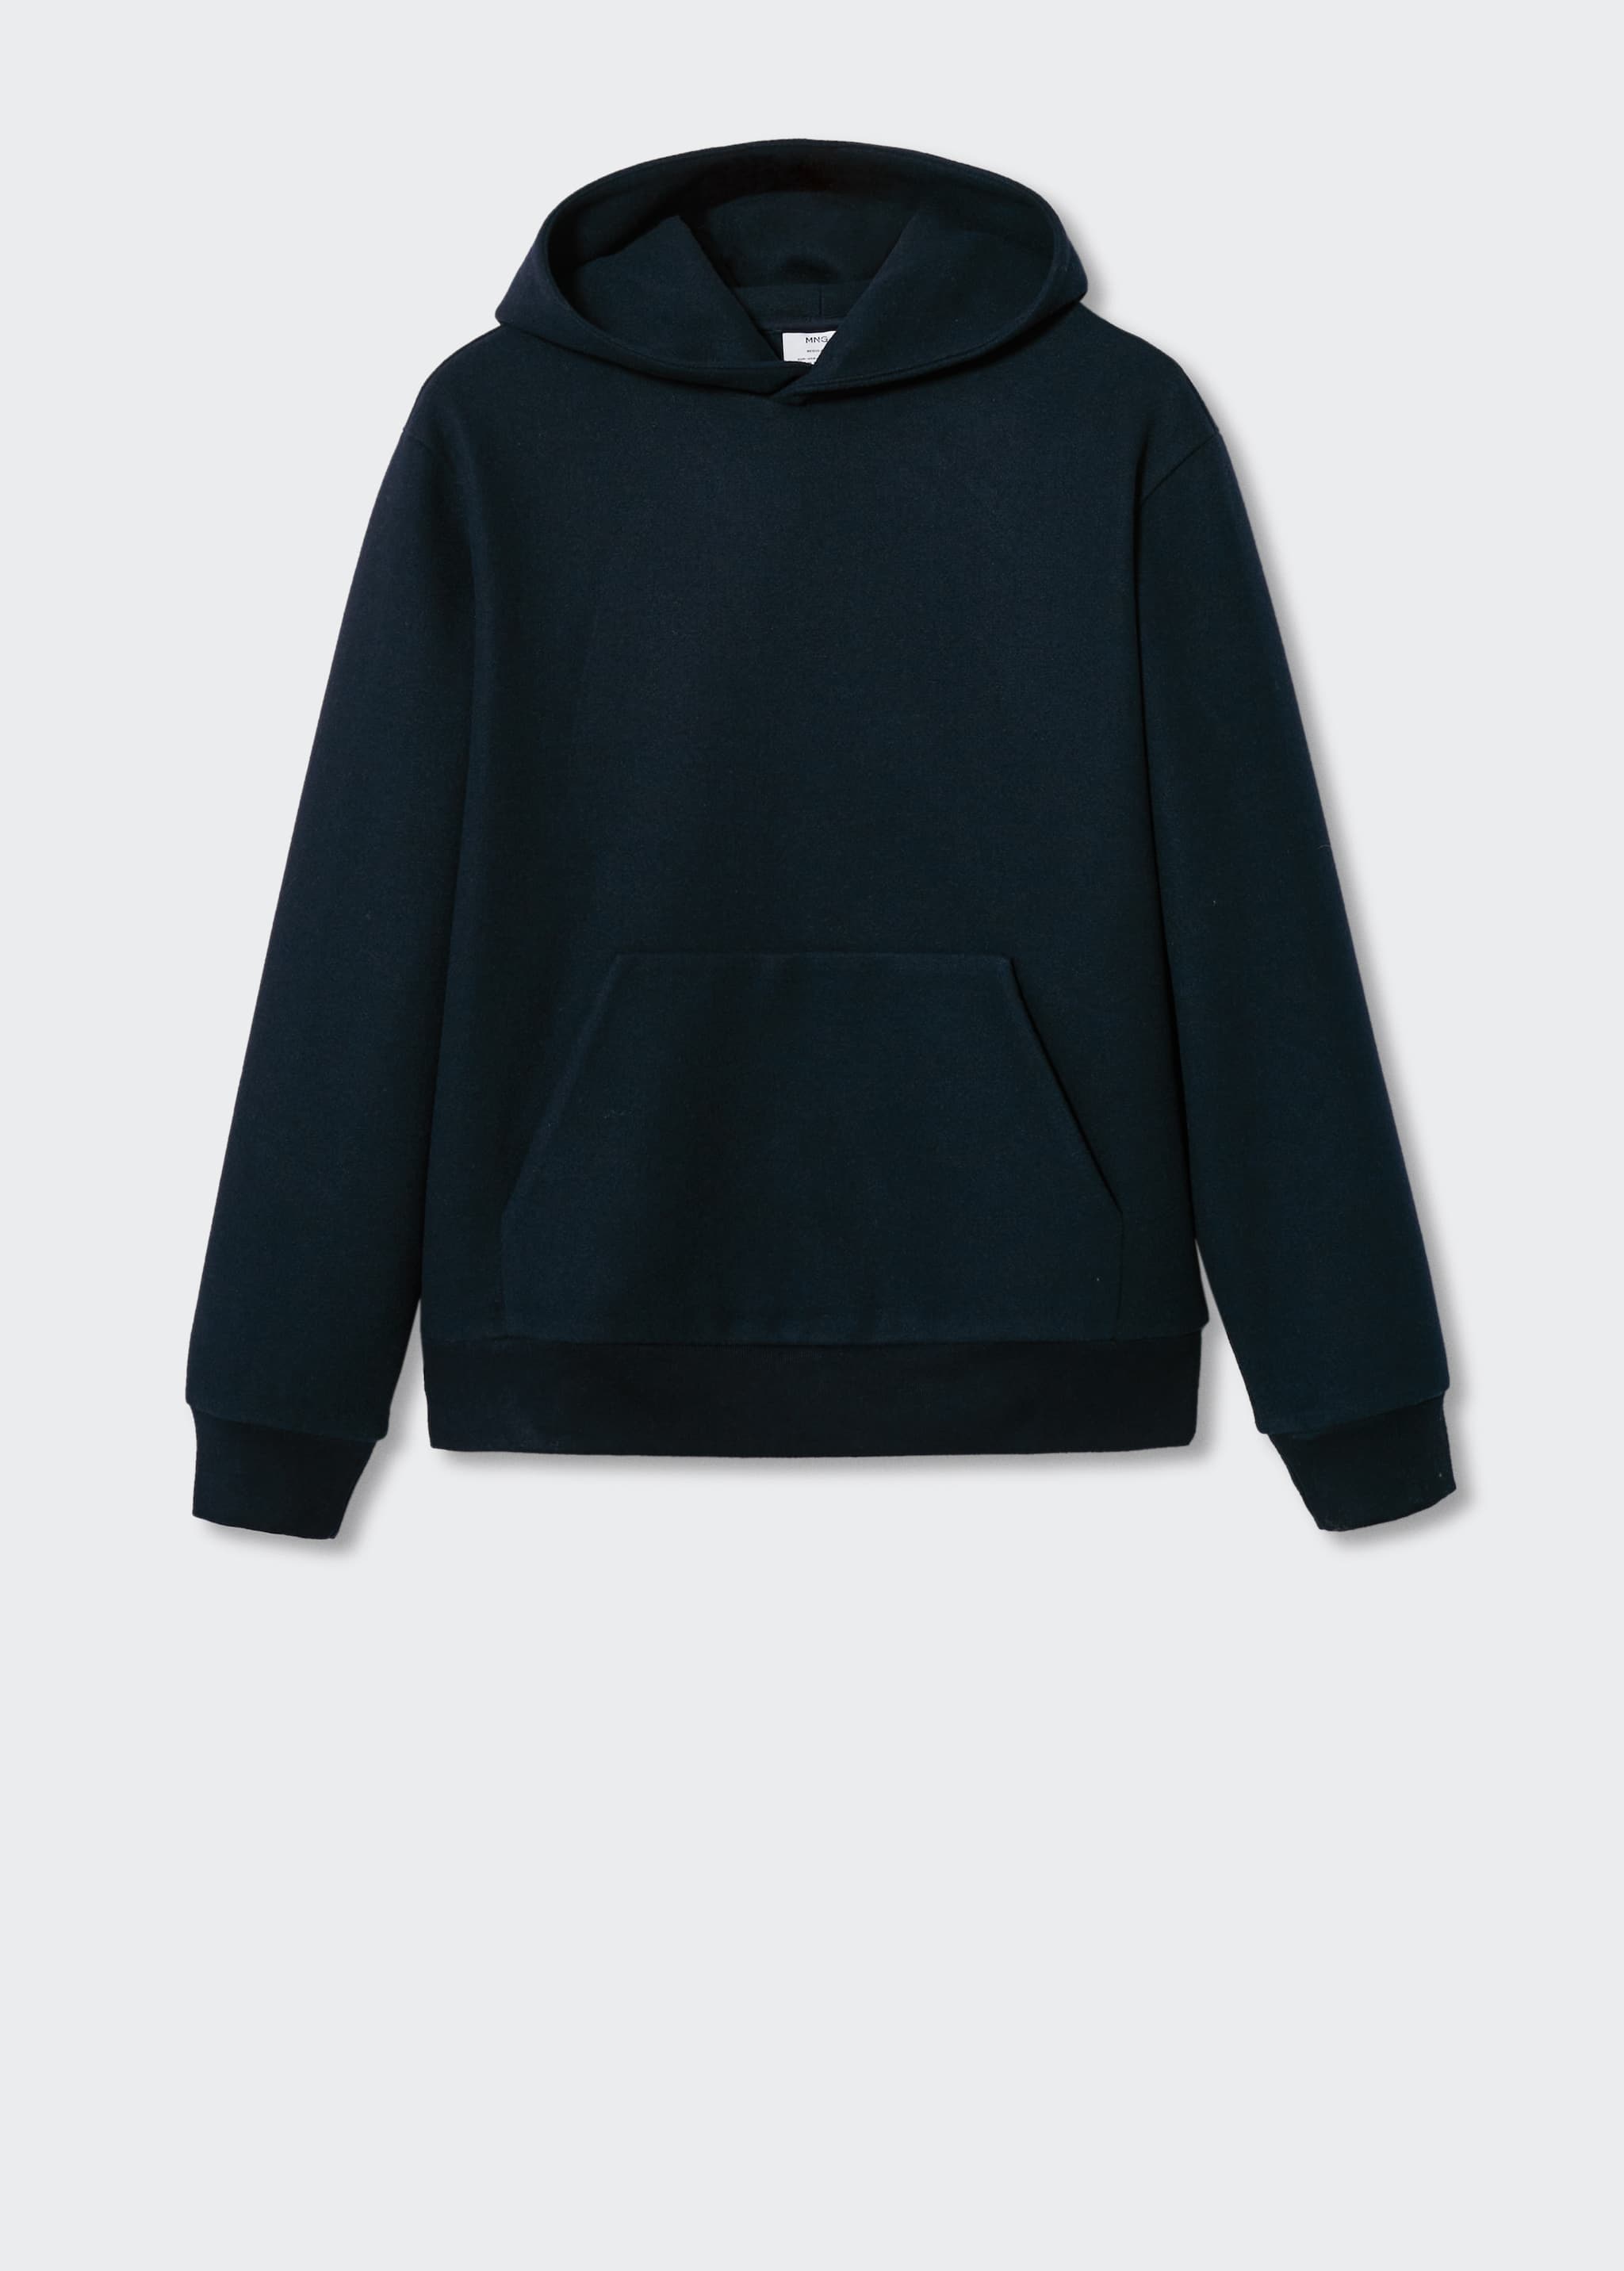 Textured hooded sweatshirt - Article without model